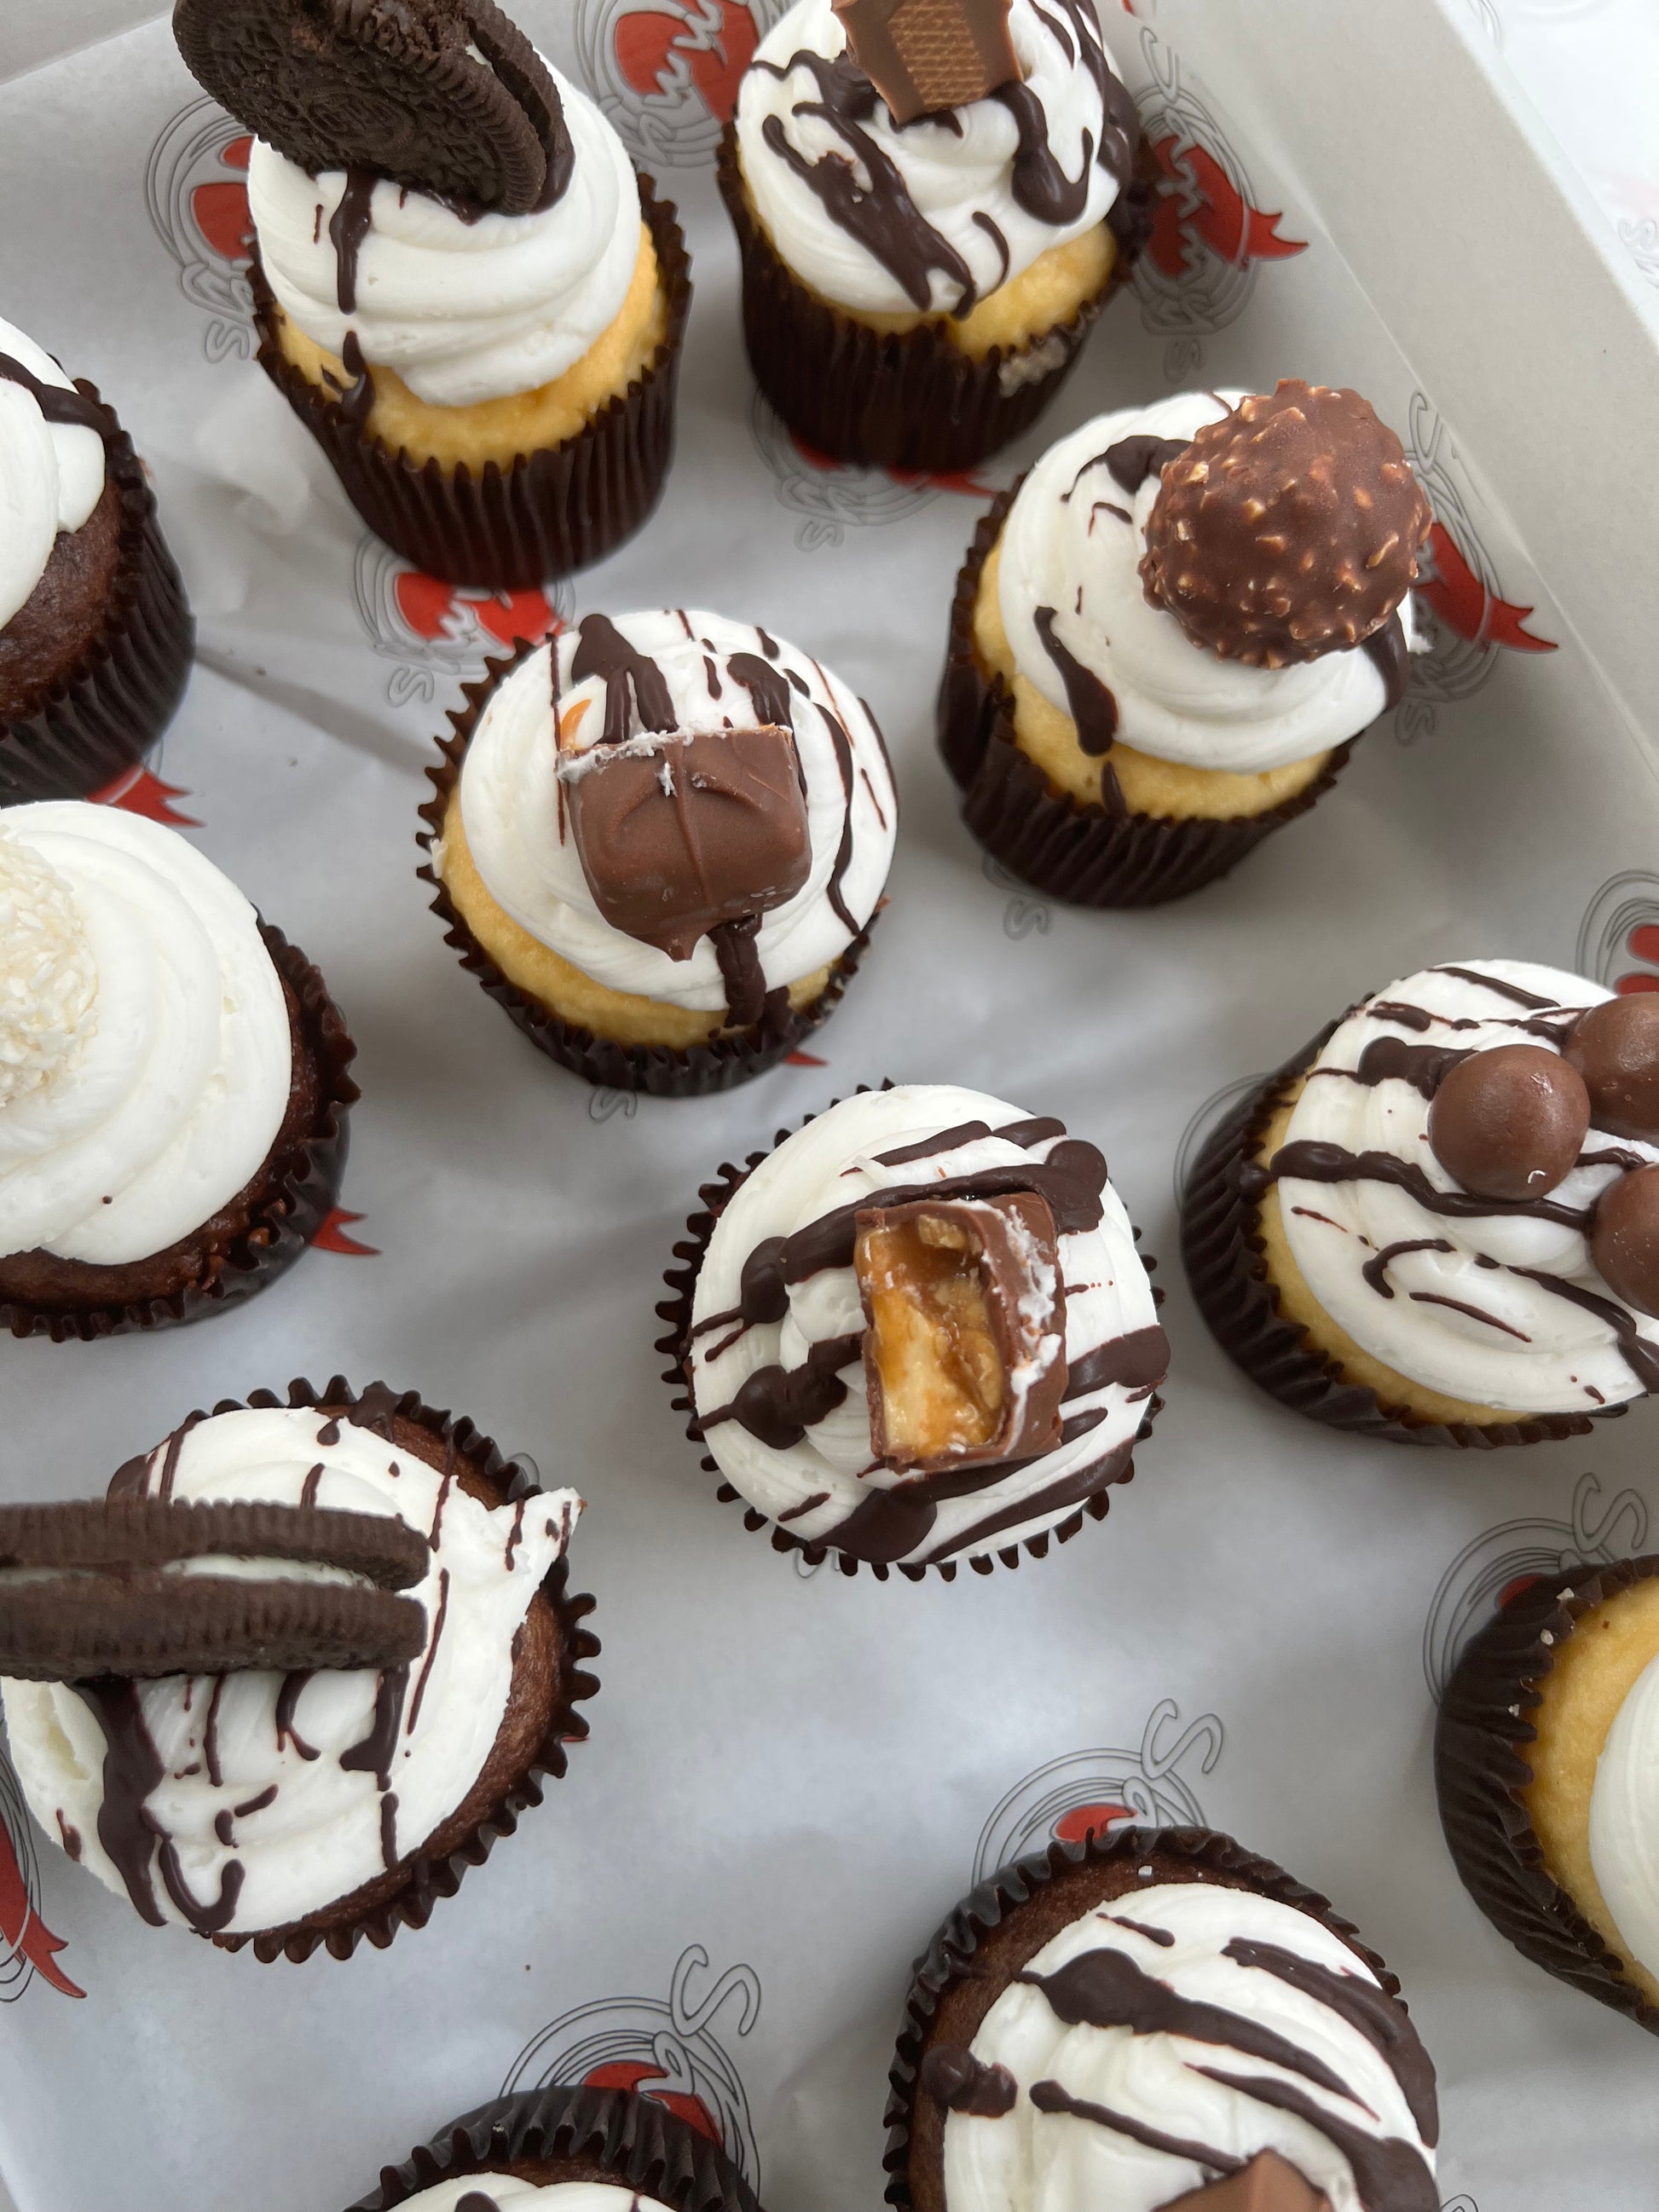 Loaded Cupcakes - Sammys Catering & Co